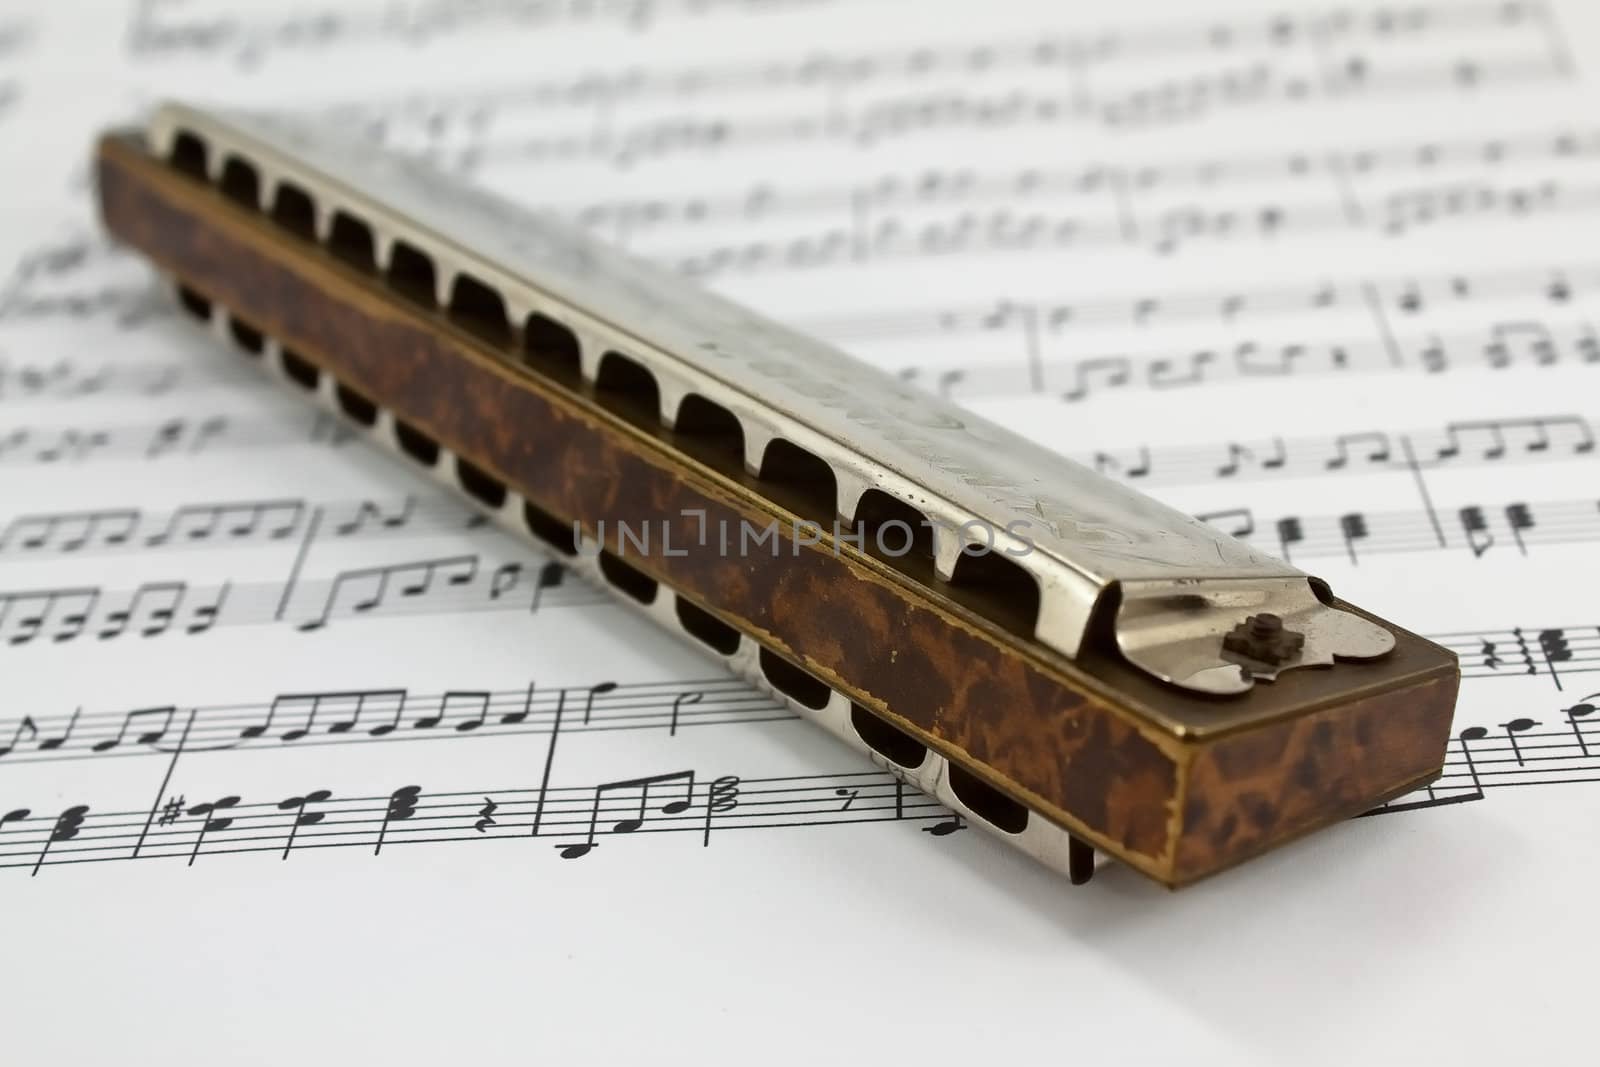 A harmonica on music sheets background
